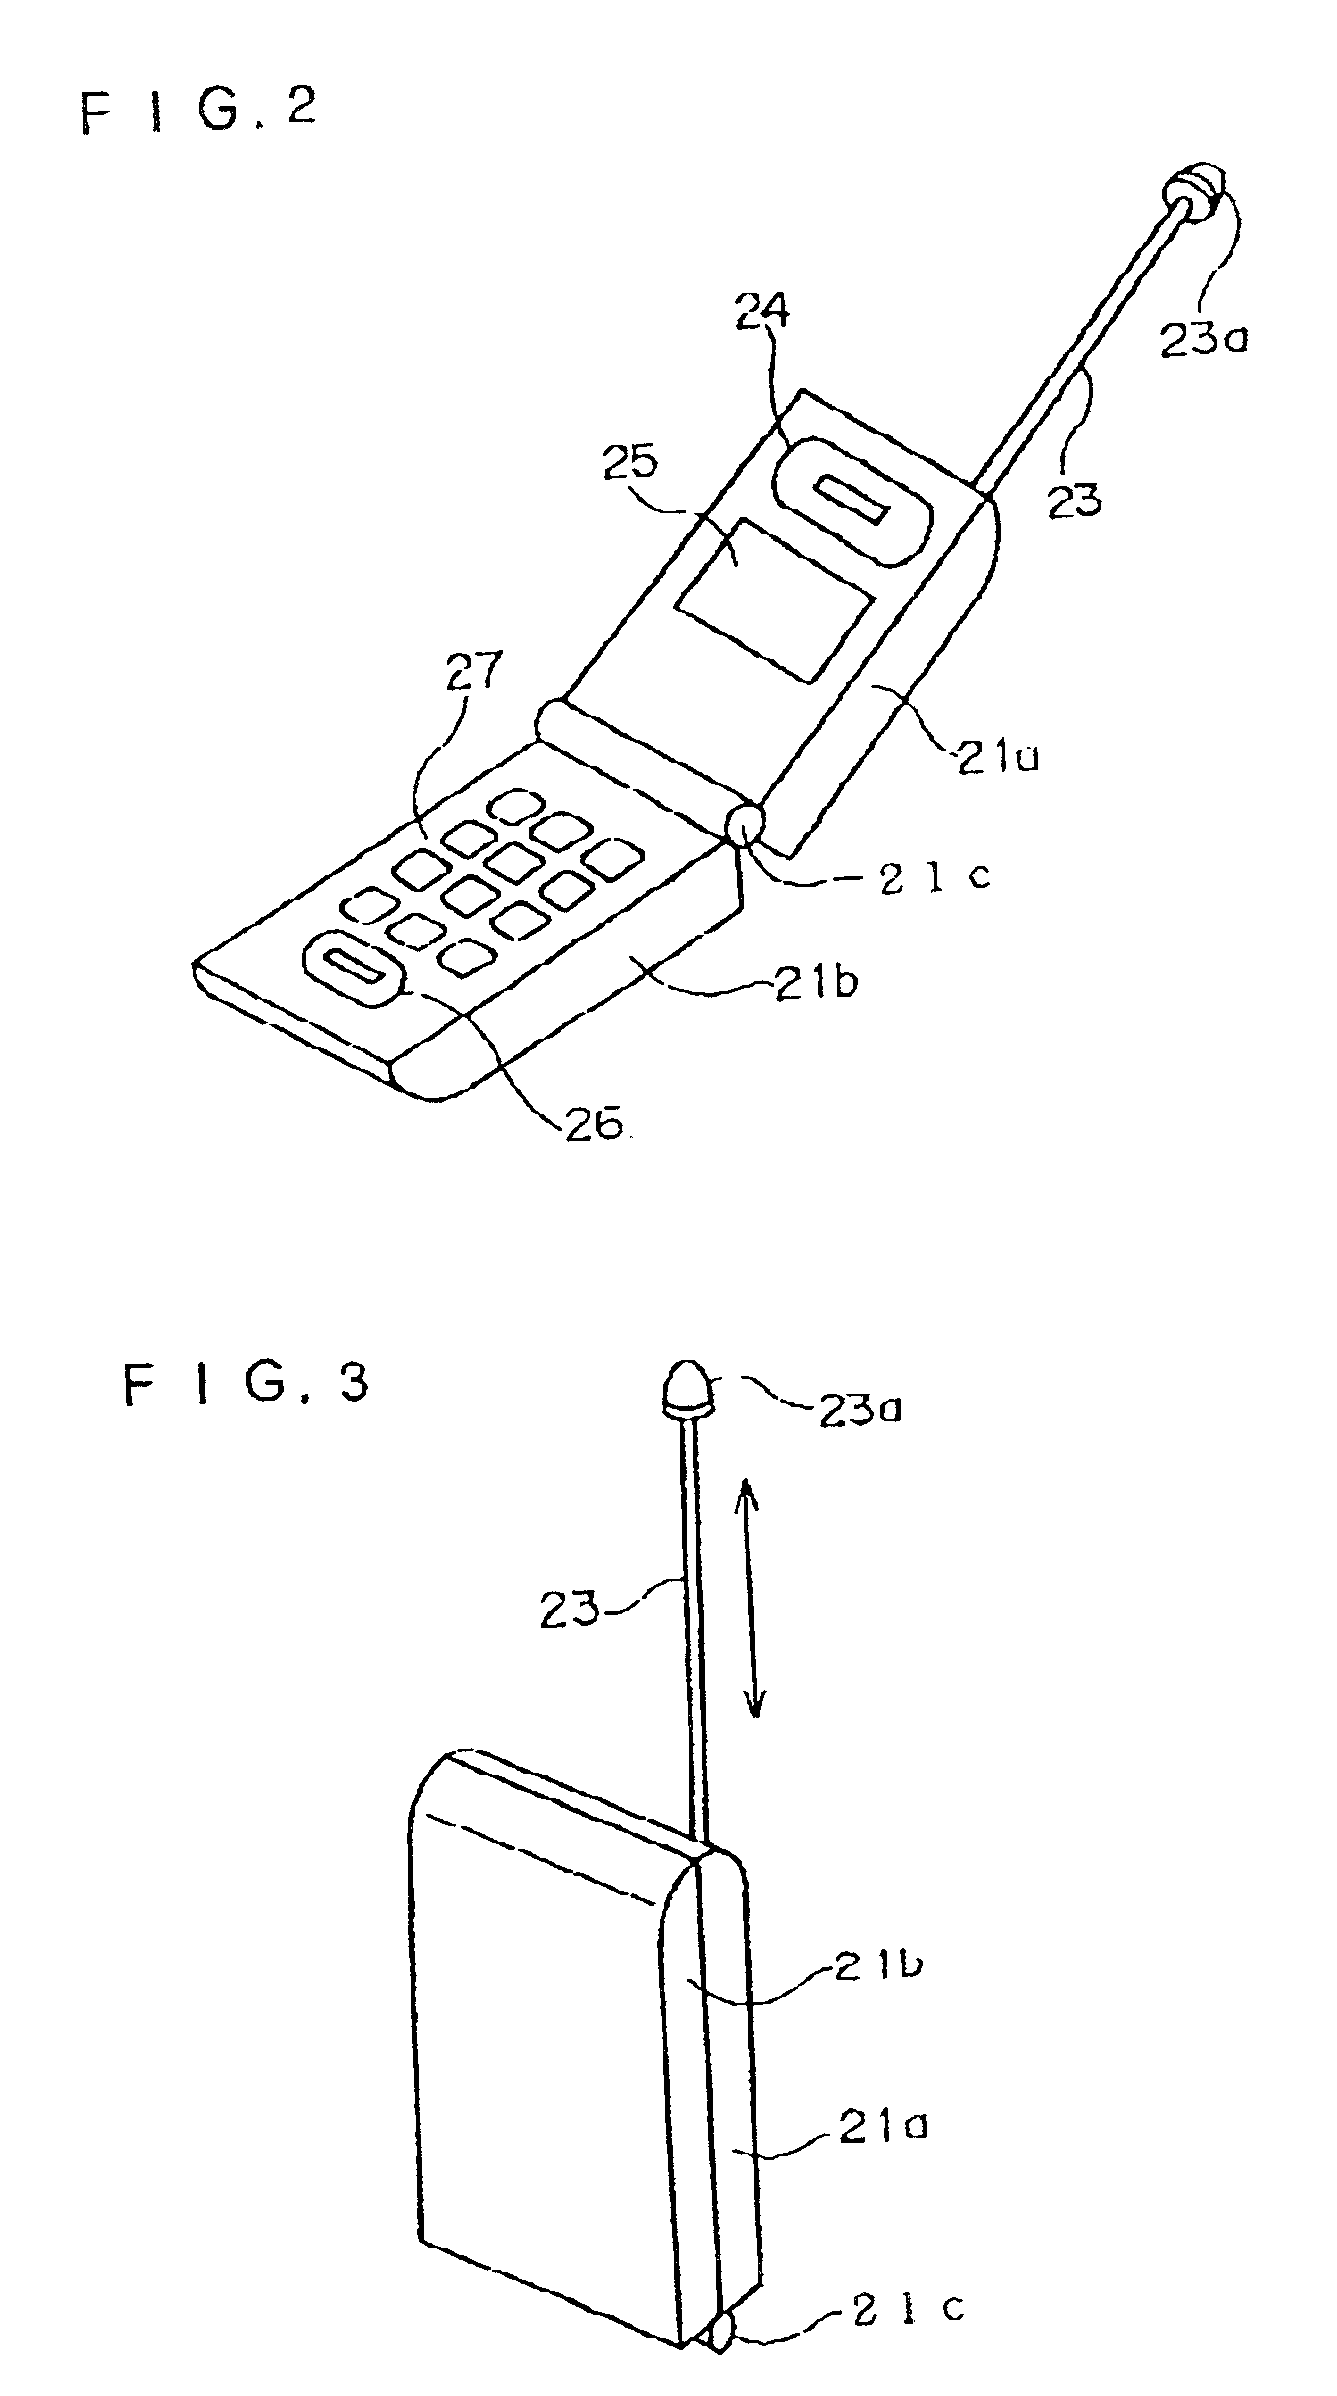 Foldable cellular phone having a function of transmitting and receiving e-mail and method of operating the same